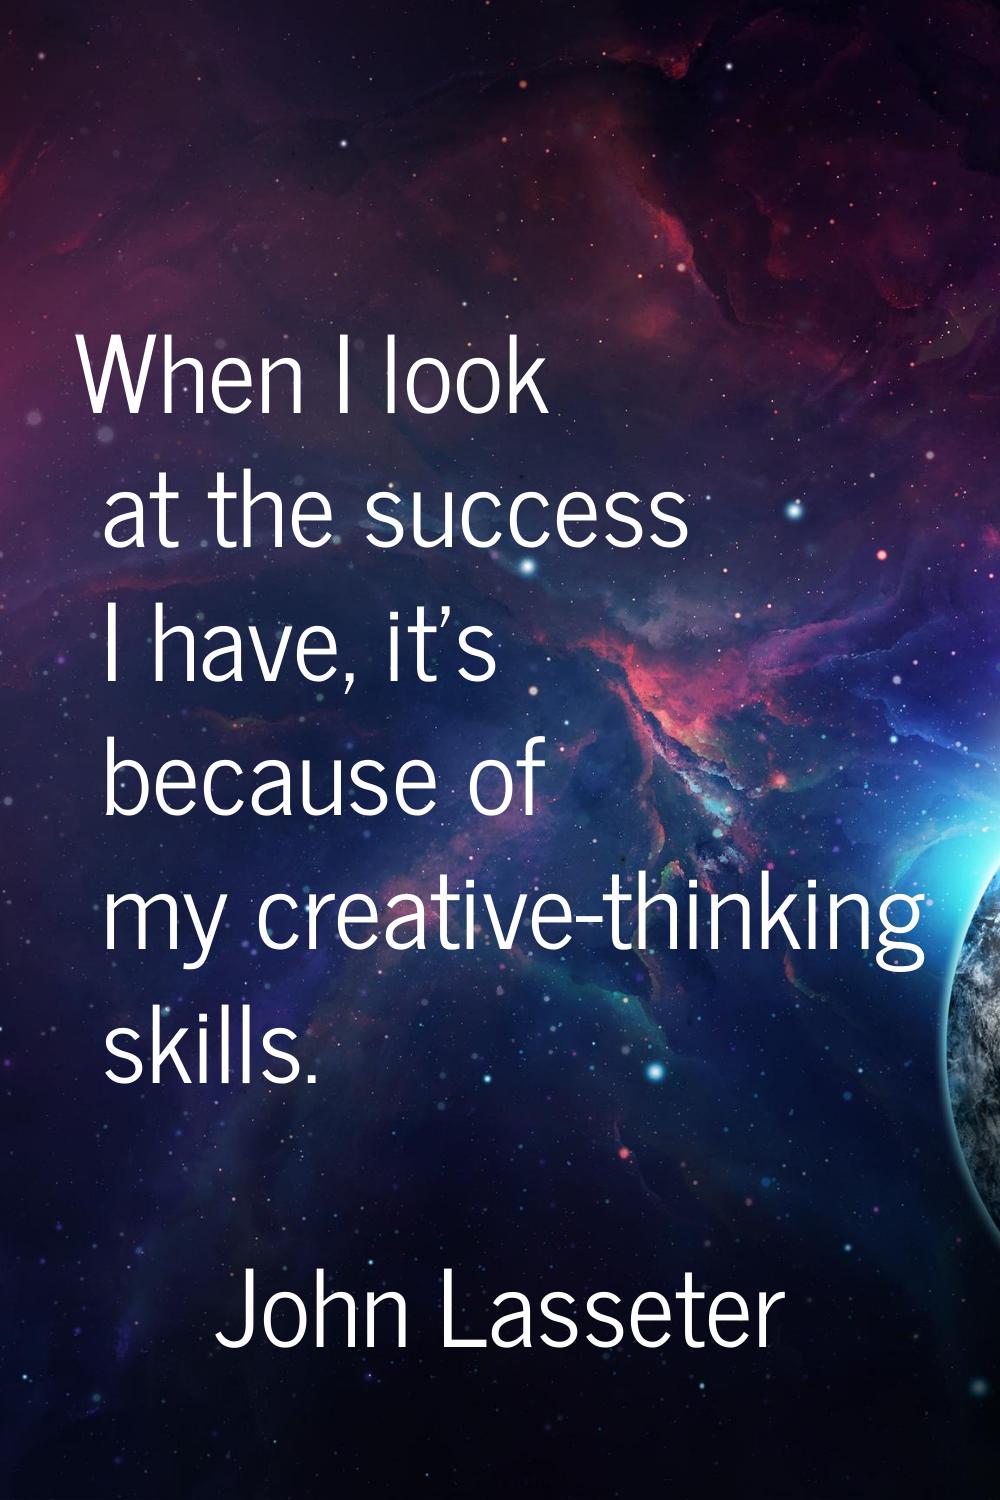 When I look at the success I have, it's because of my creative-thinking skills.